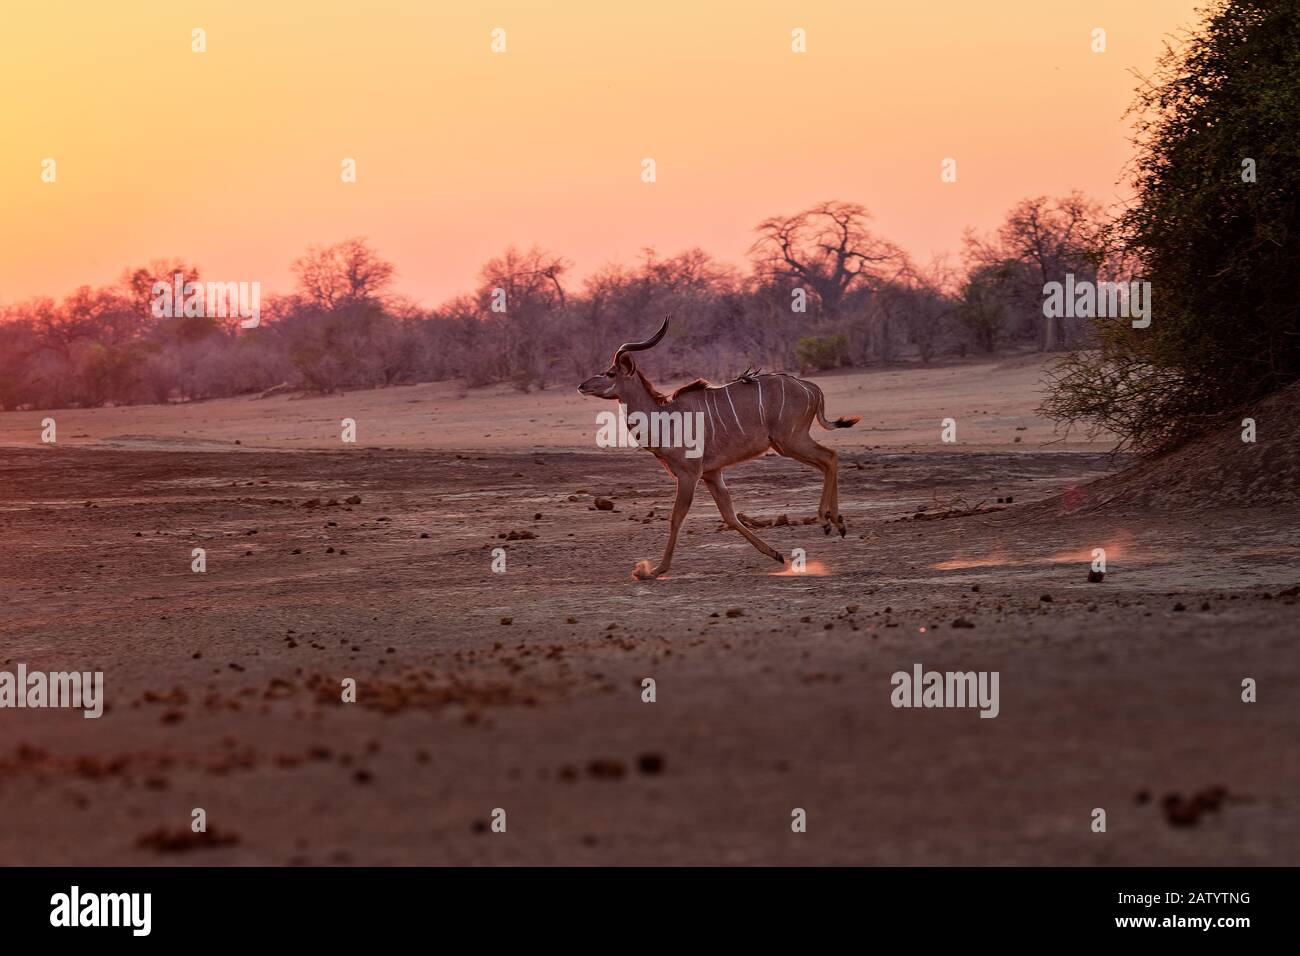 Greater Kudu - Tragelaphus strepsiceros woodland antelope found throughout eastern and southern Africa, running during african sunrise or sunset with Stock Photo